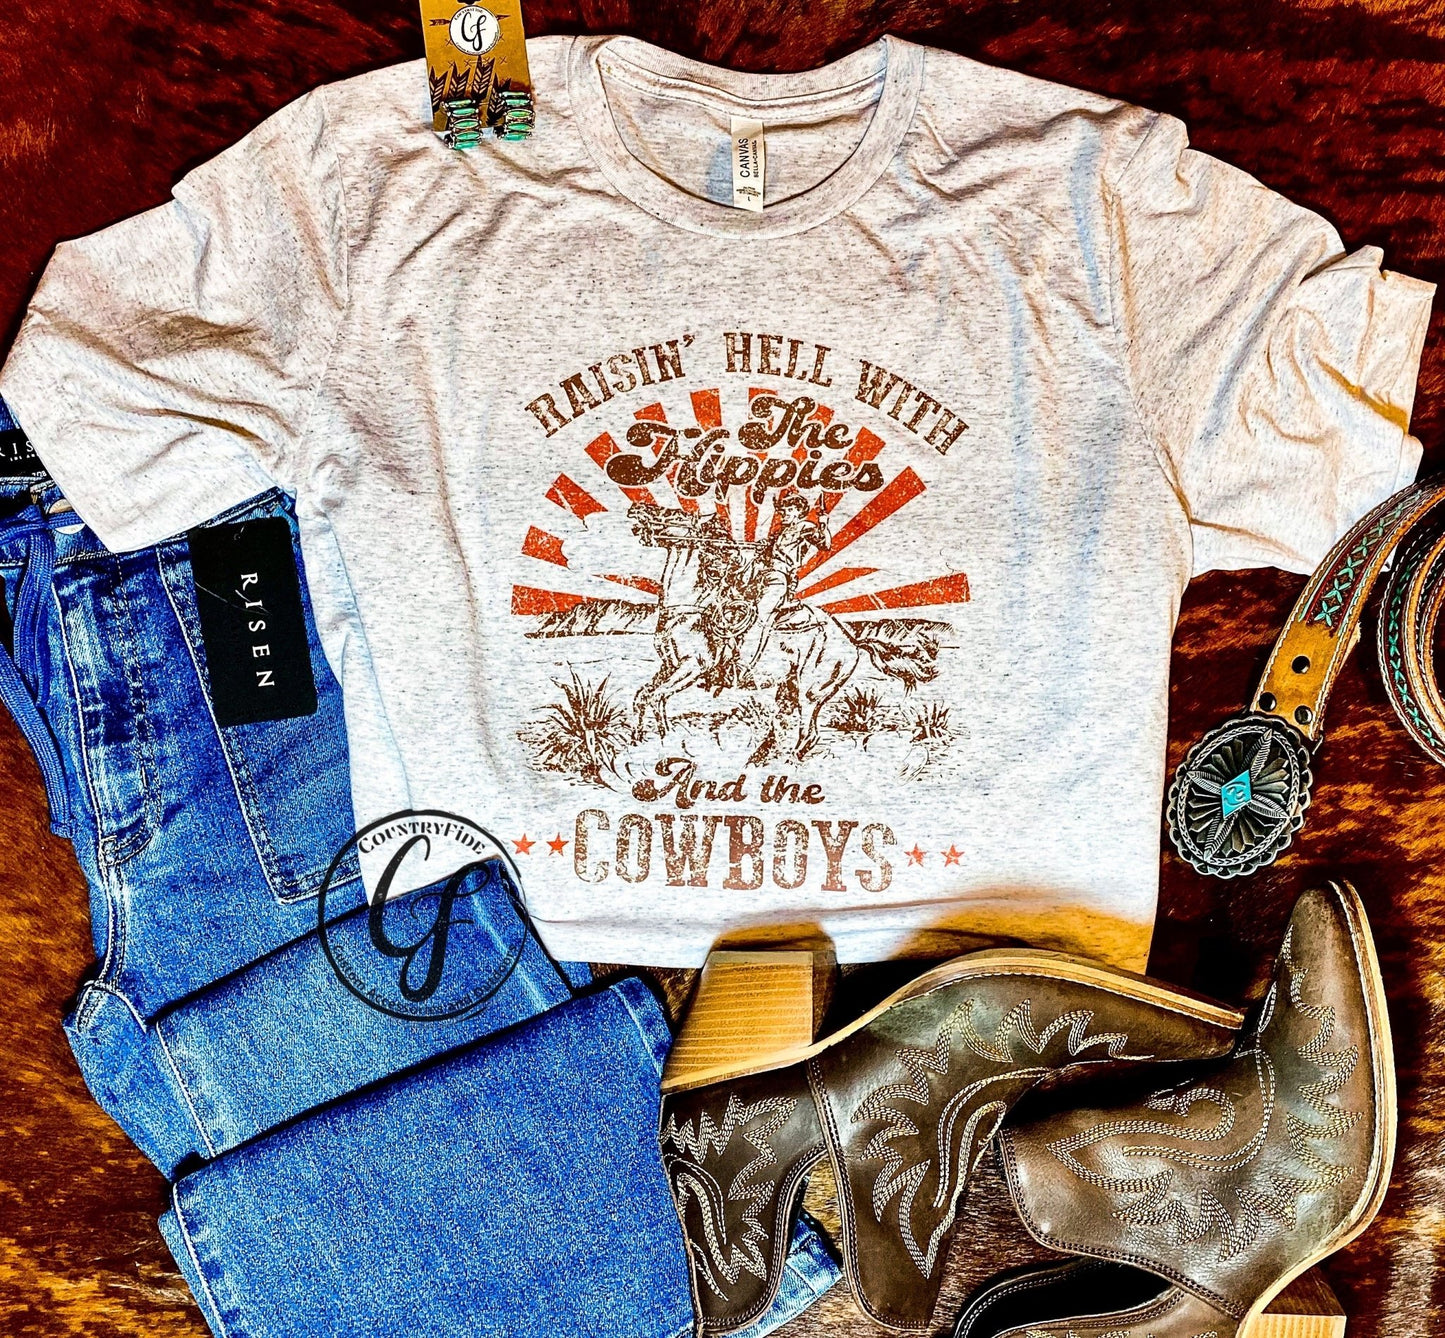 Raisin’ Hell - CountryFide Custom Accessories and Outdoors